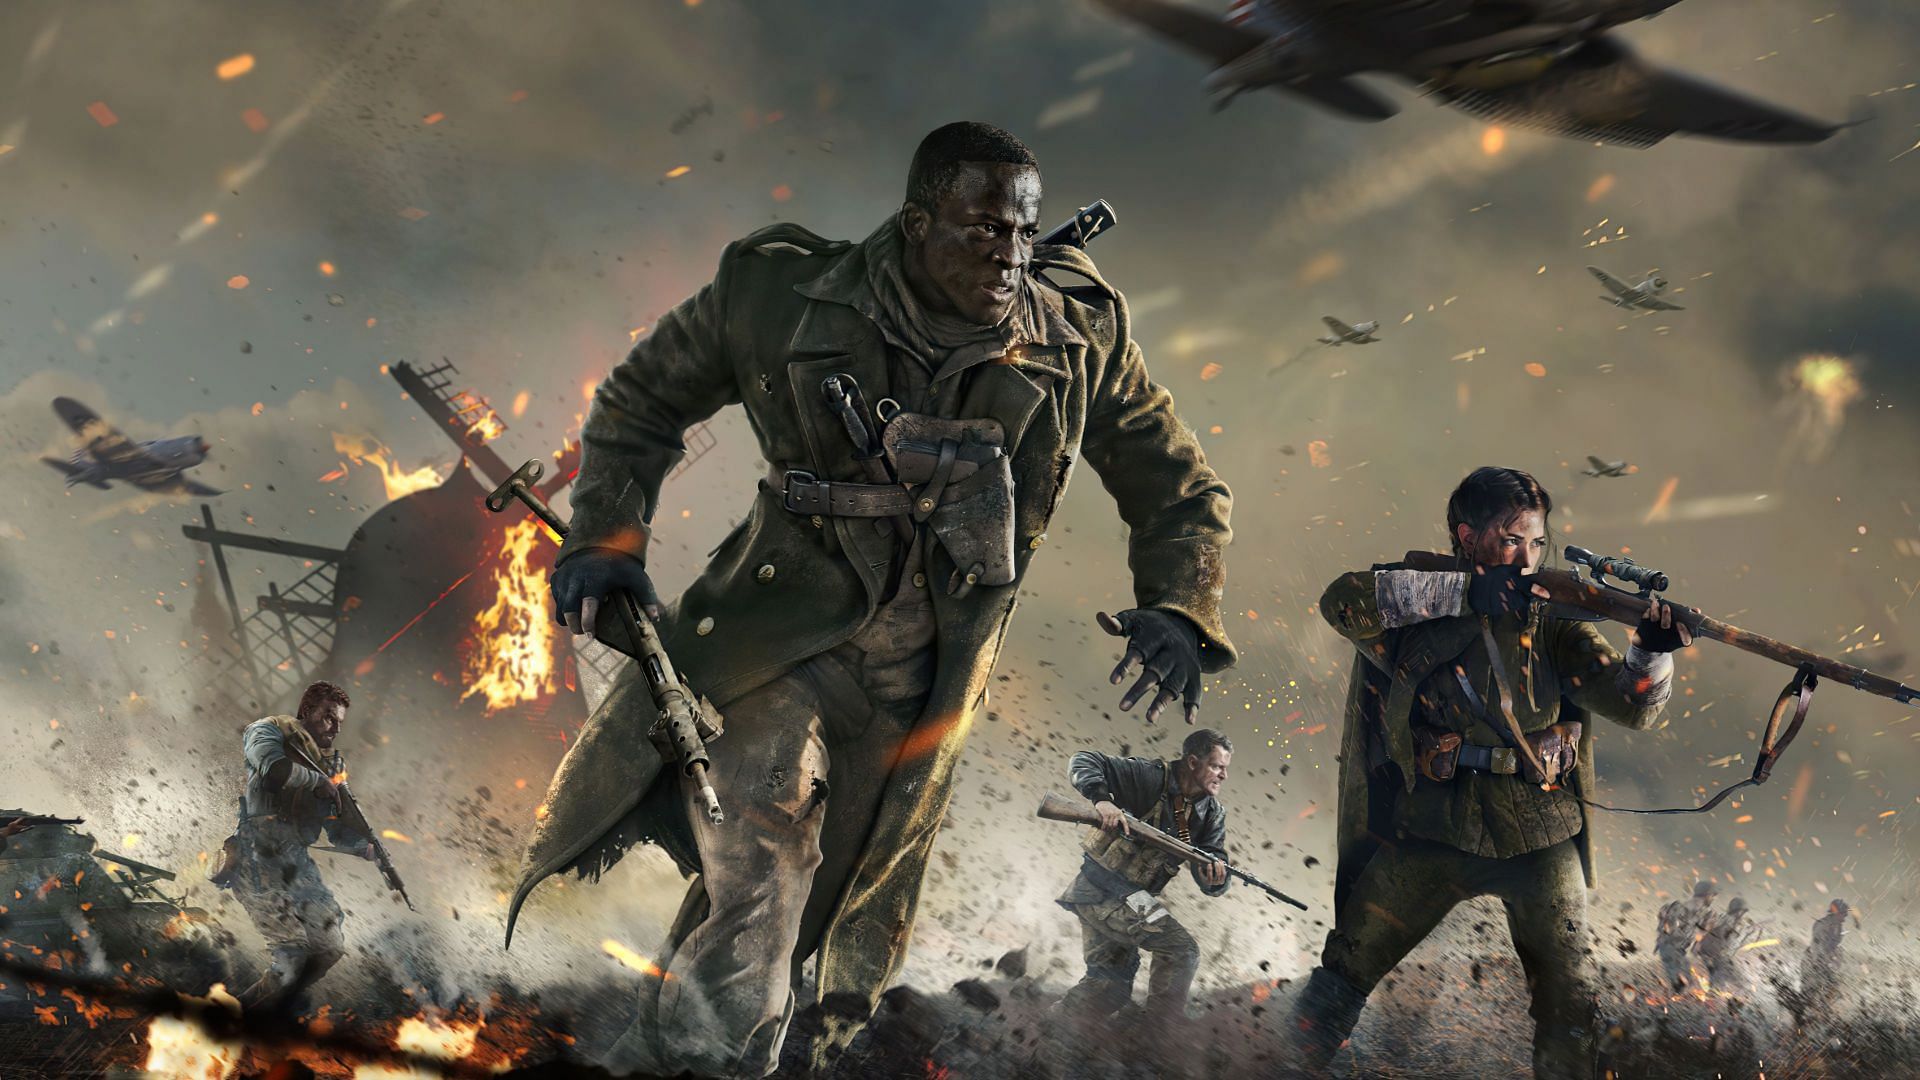 Players are facing crash issues in Call of Duty Vanguard (Image by Activision)